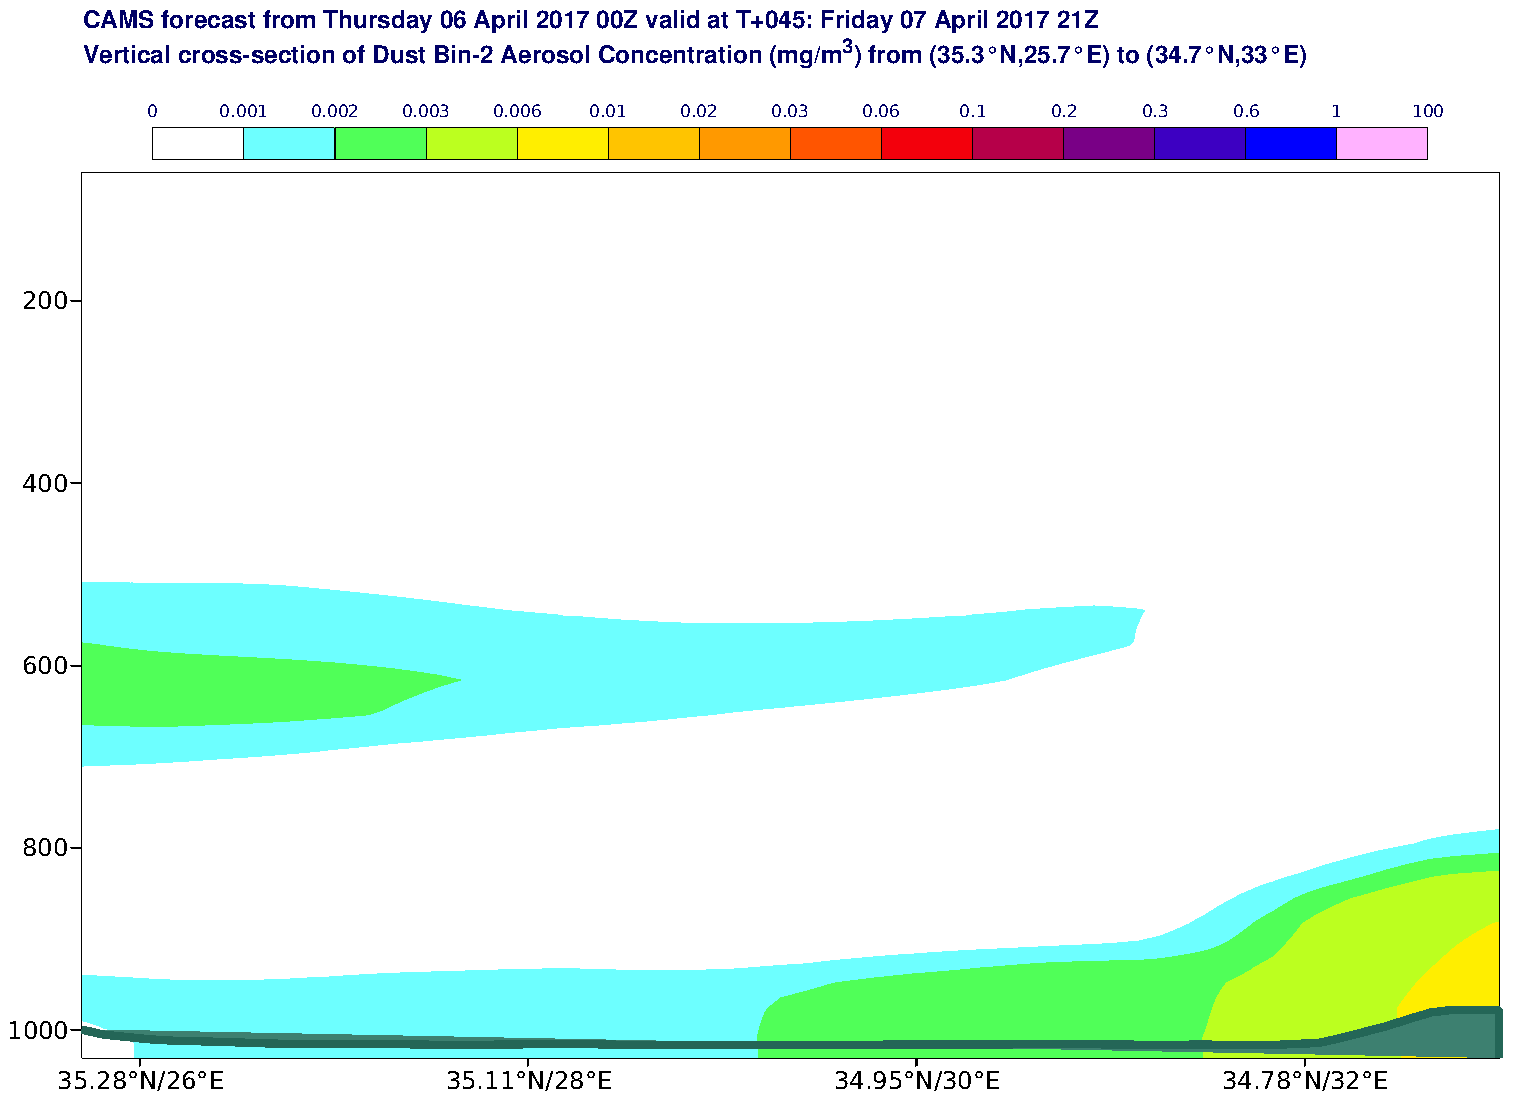 Vertical cross-section of Dust Bin-2 Aerosol Concentration (mg/m3) valid at T45 - 2017-04-07 21:00